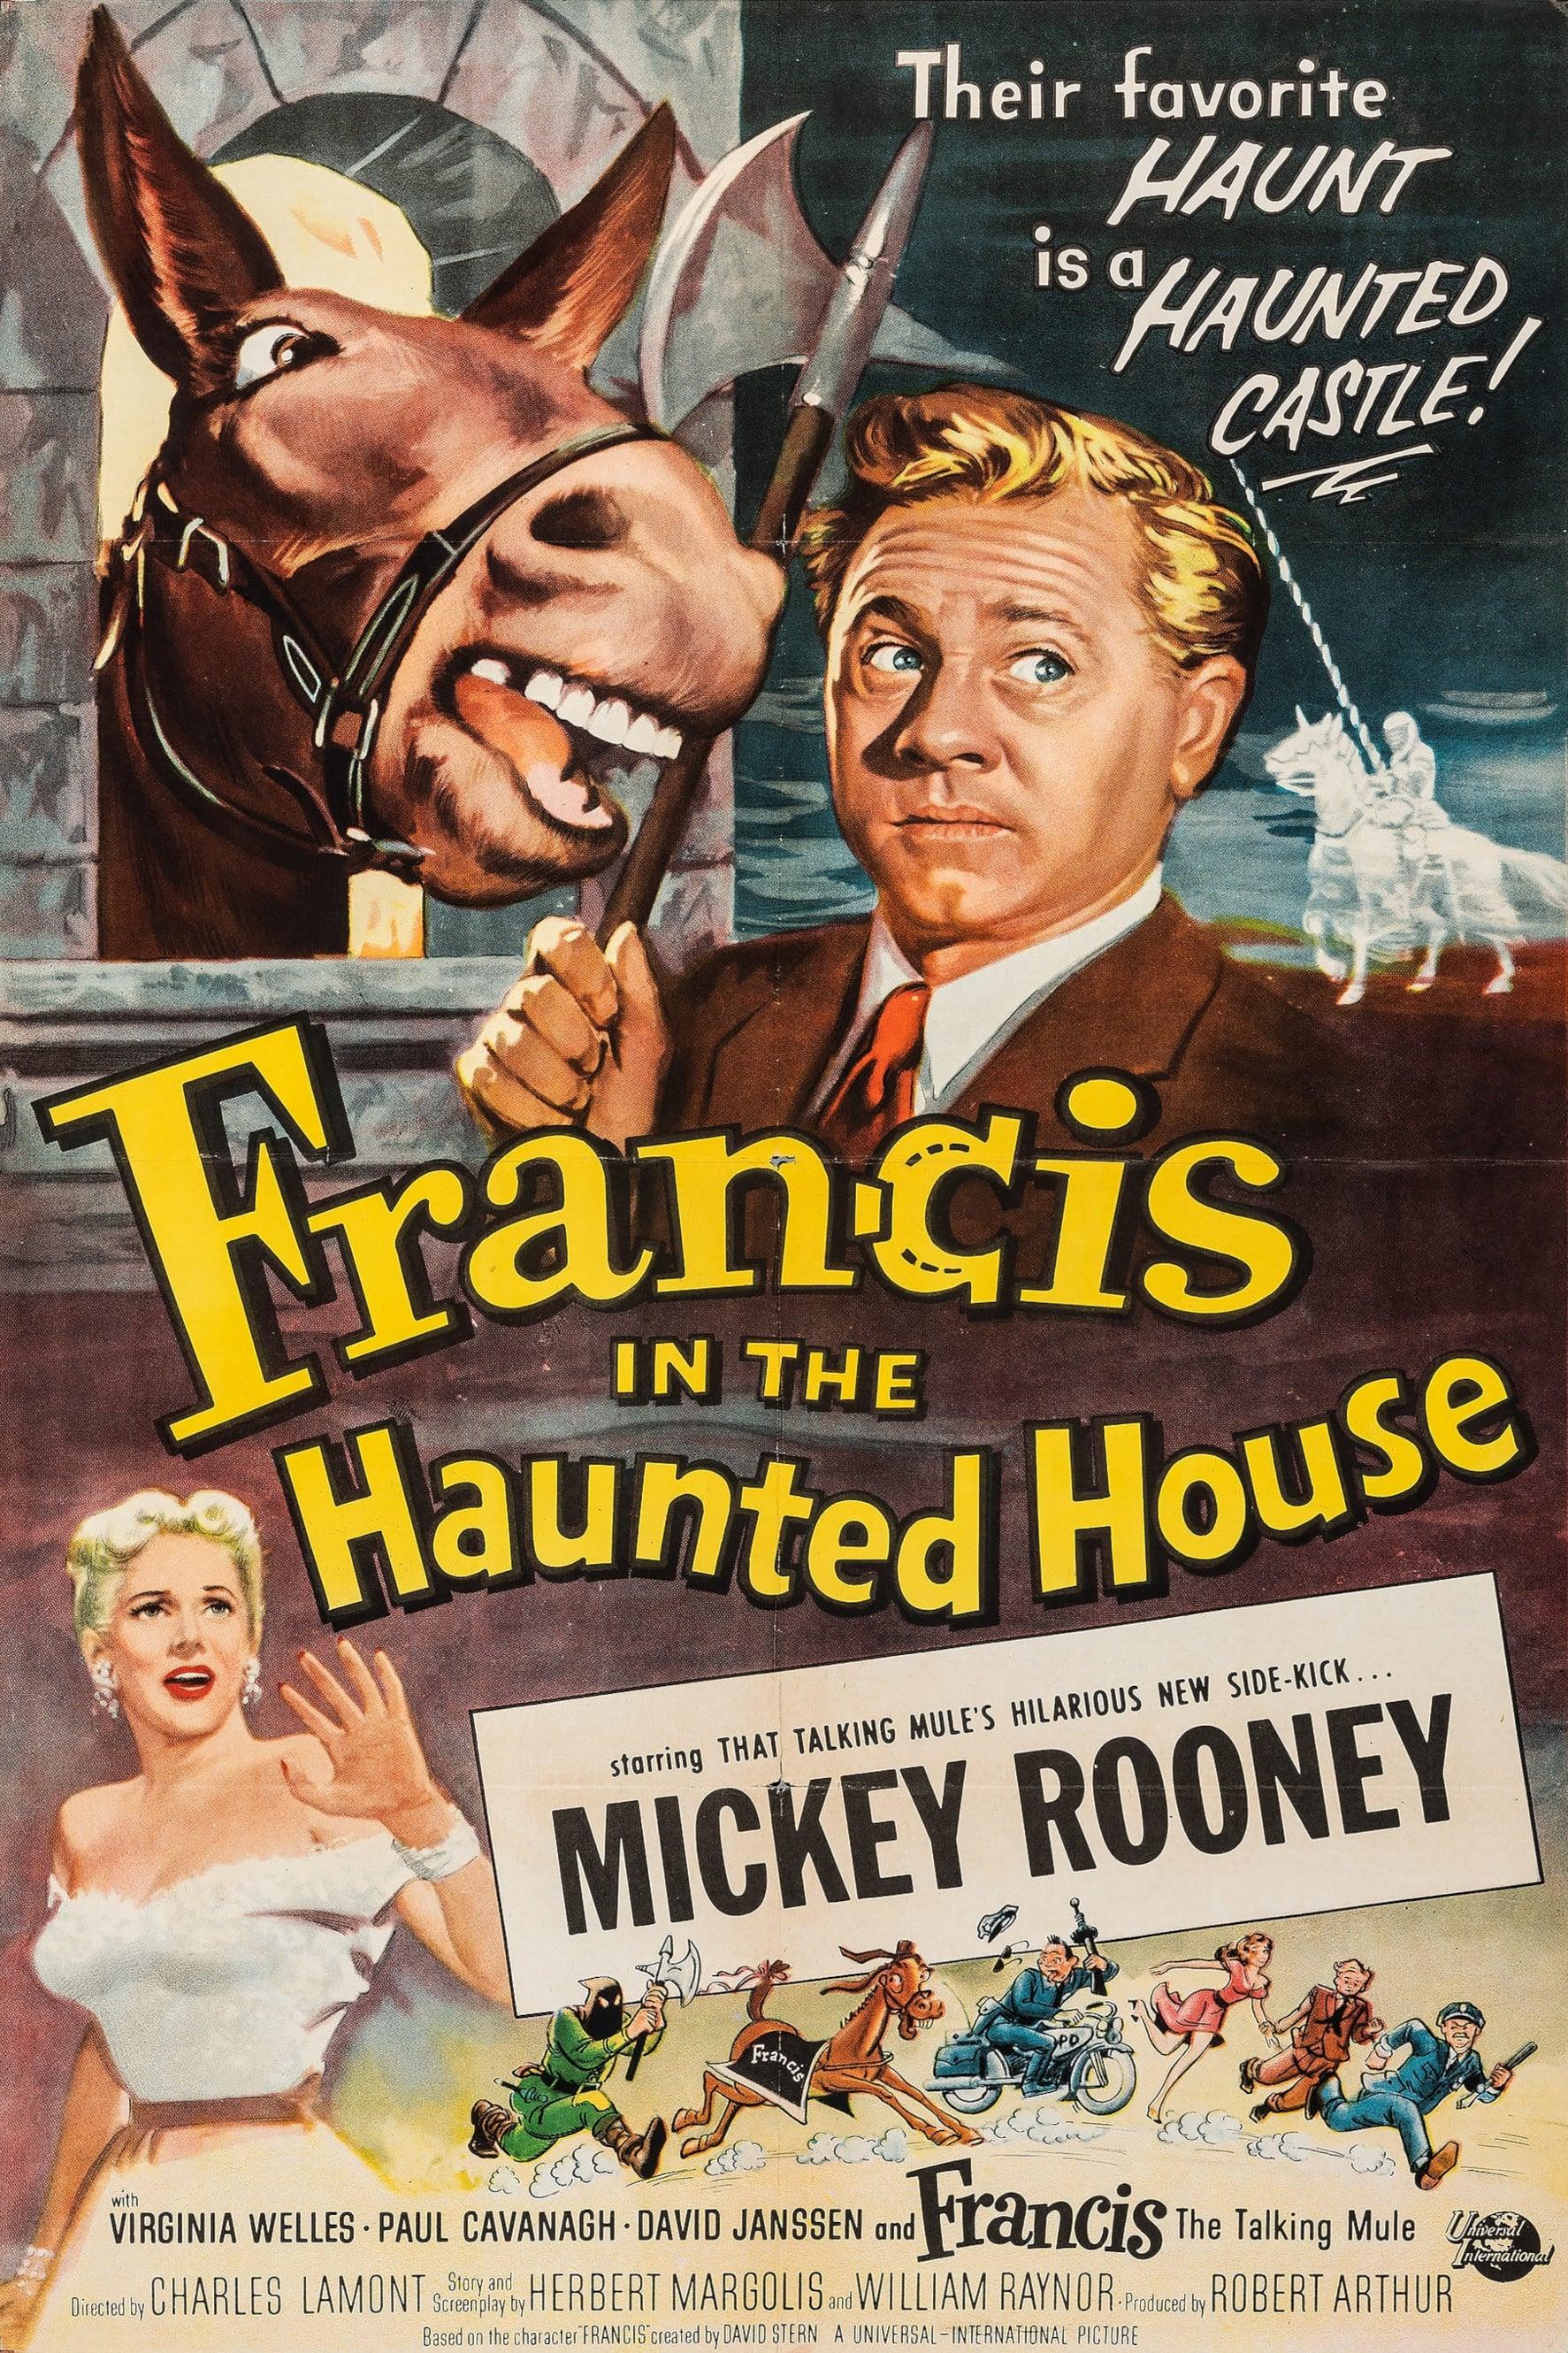 Francis in the Haunted House poster